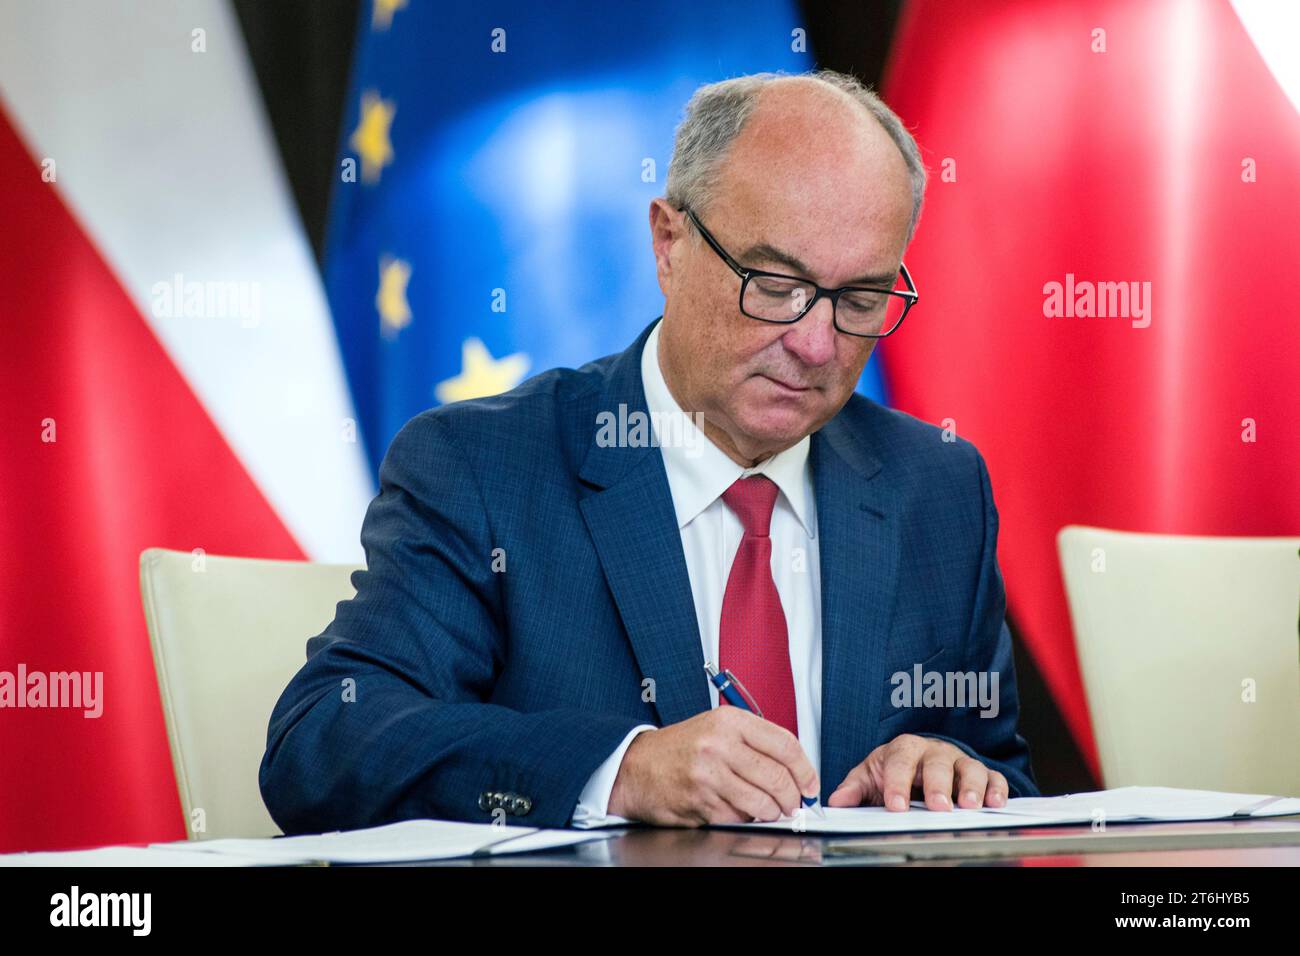 Wlodzimierz Czarzasty, the co-chairman of the New Left party, signs the coalition agreement in the Parliament. The leaders of Polish opposition parties have signed a coalition agreement that lays out a road map for governing the nation over the next four years. The parties collectively won a majority of votes in last month's parliamentary election. Their candidate to be the next prime minister is Donald Tusk, a former prime minister who leads the largest of the opposition parties, the centrist Civic Platform. Tusk said the parties worked to seal their agreement a day before the Independence Da Stock Photo